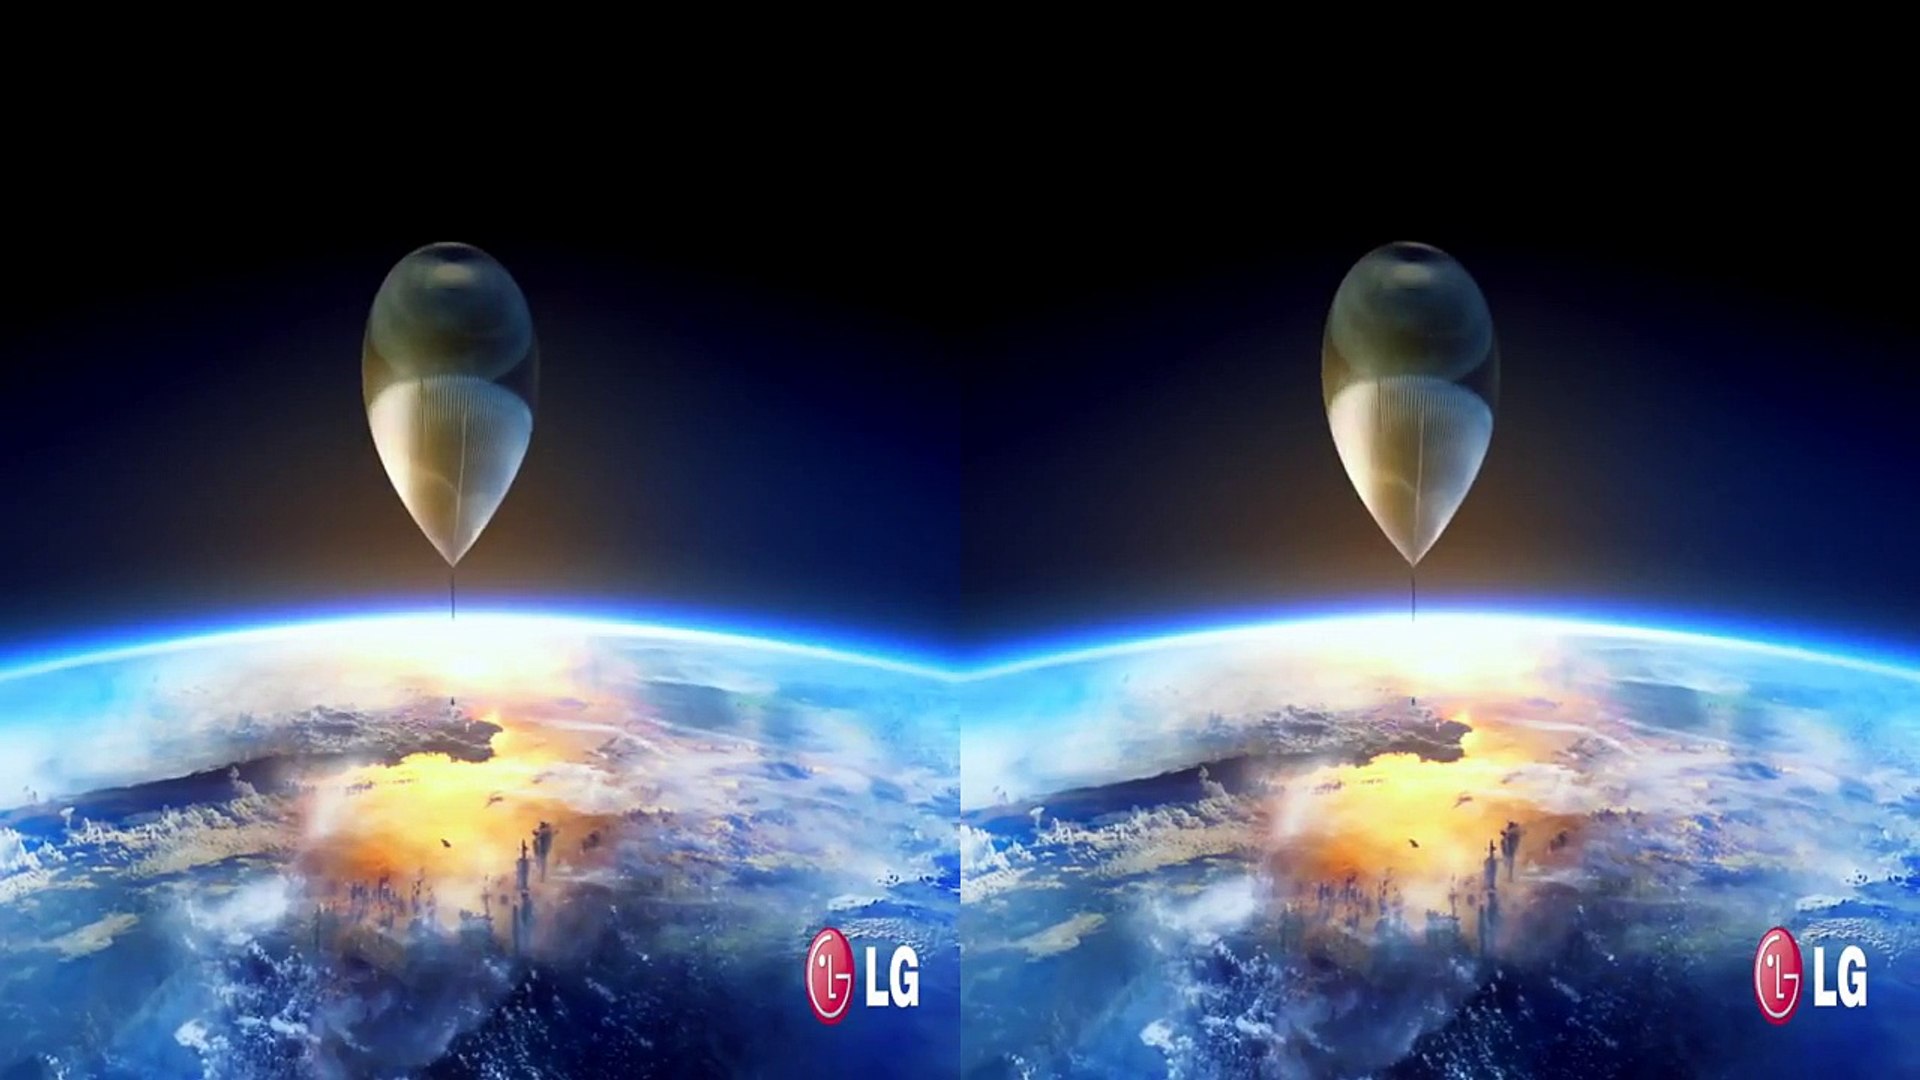 LG 3D Demo - Stratos (Space) - 3D Side by Side (SBS) - Dailymotion Video